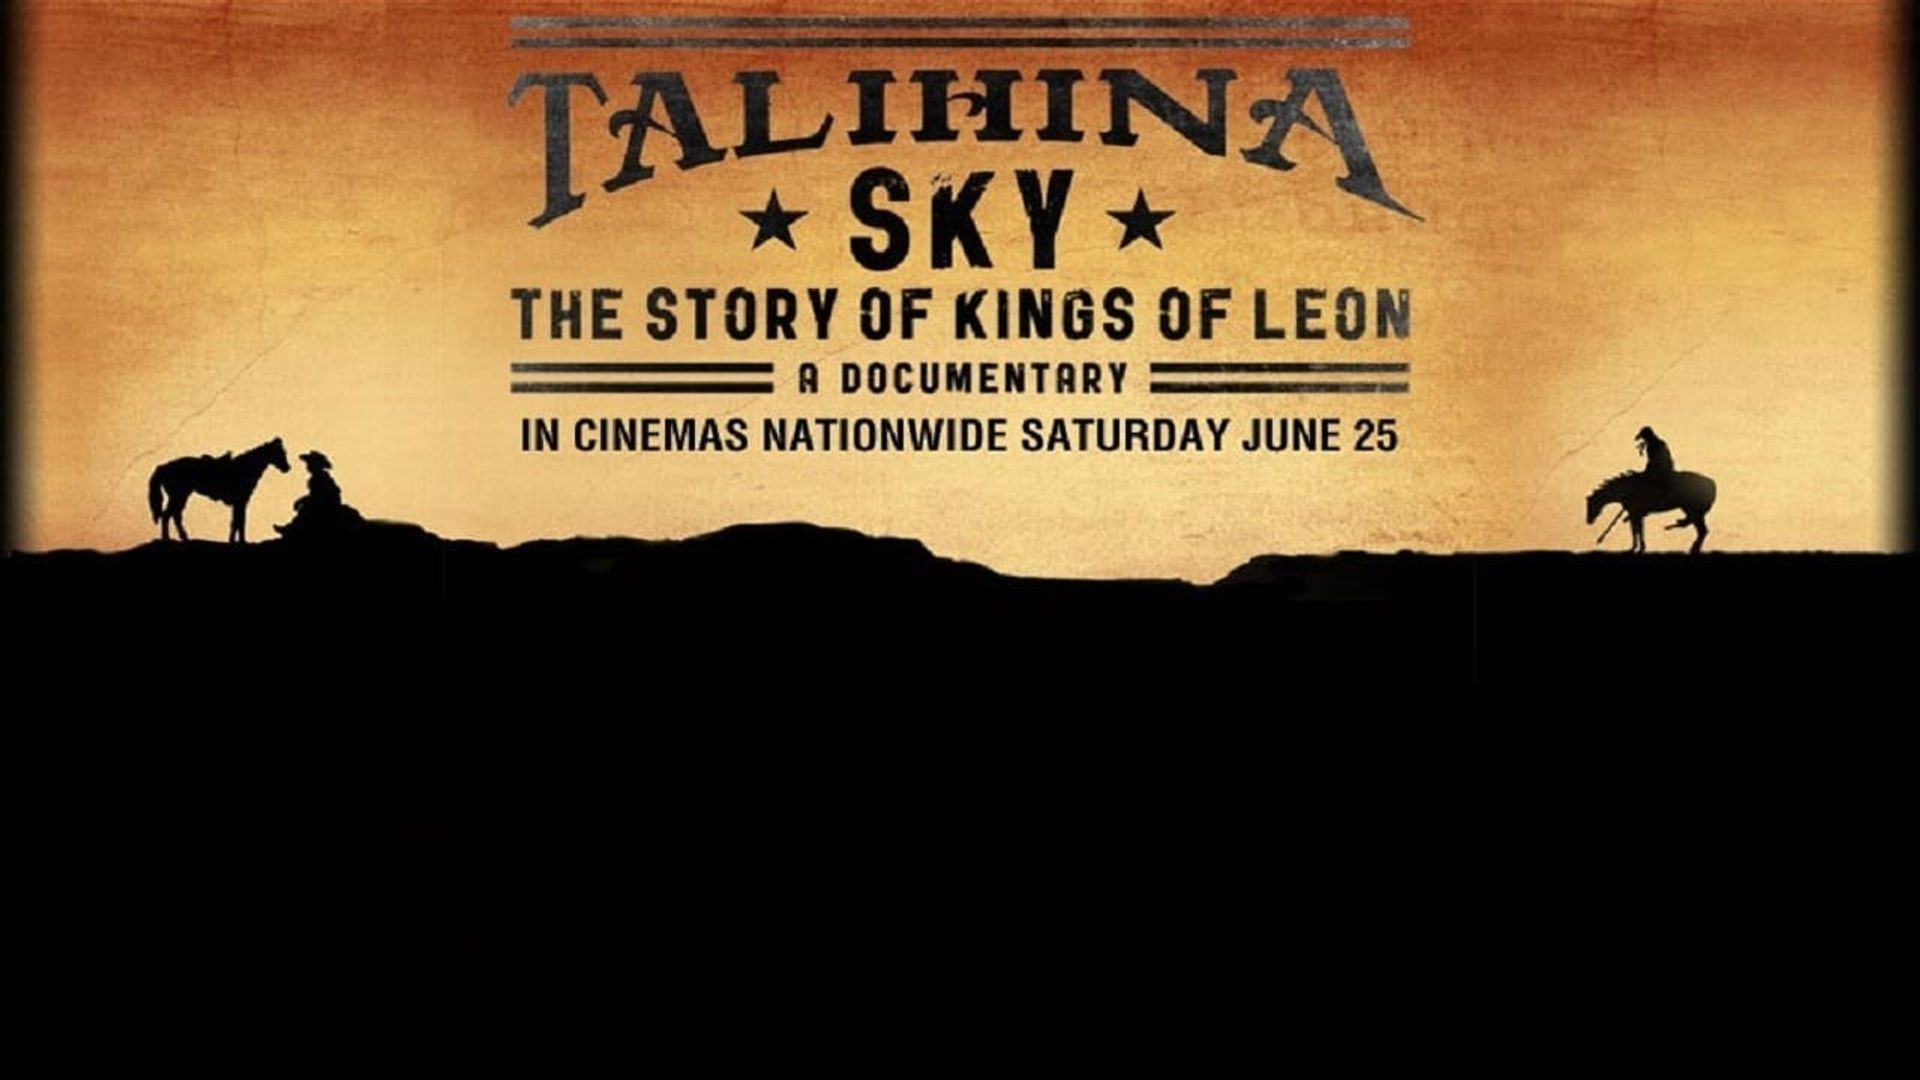 Talihina Sky: The Story of Kings of Leon background